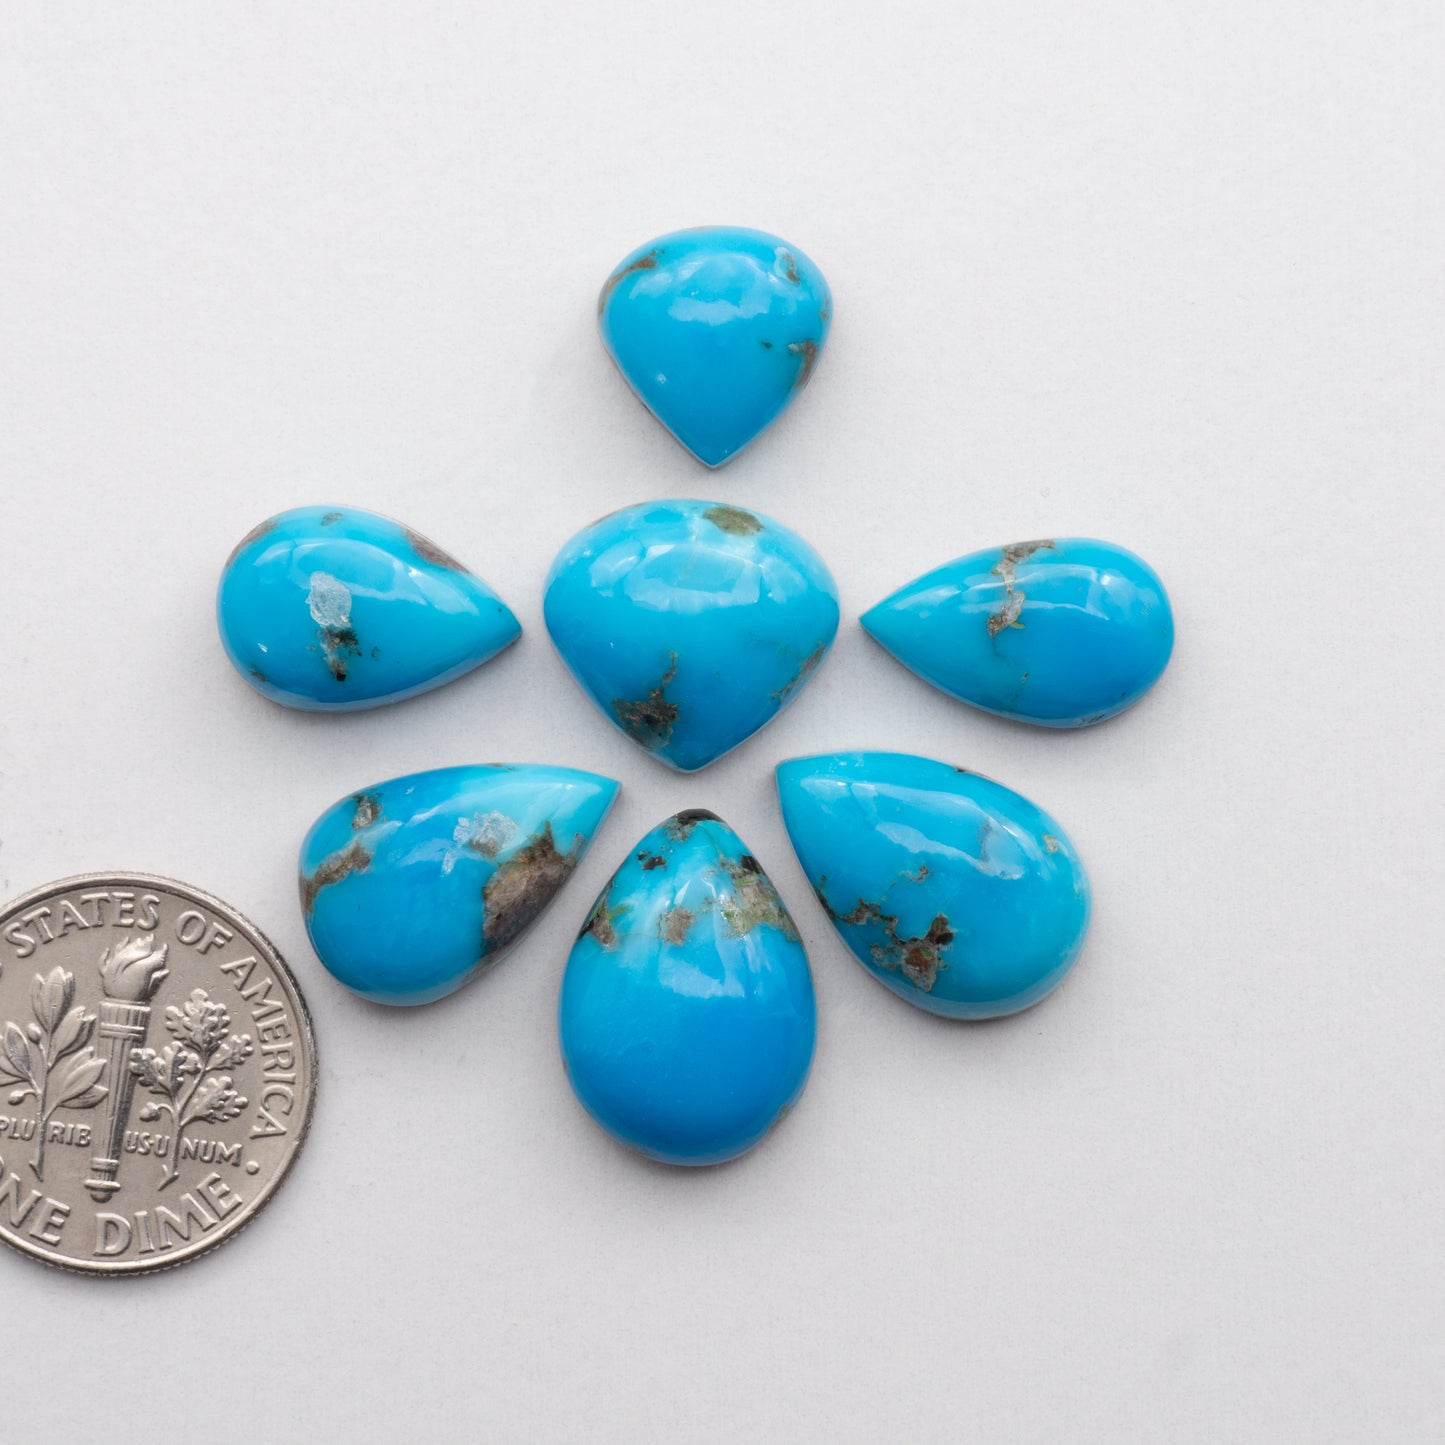 Kingman Turquoise Cabochons are a staple in the jewelry industry, known for their stunning blue-green color and durability. 